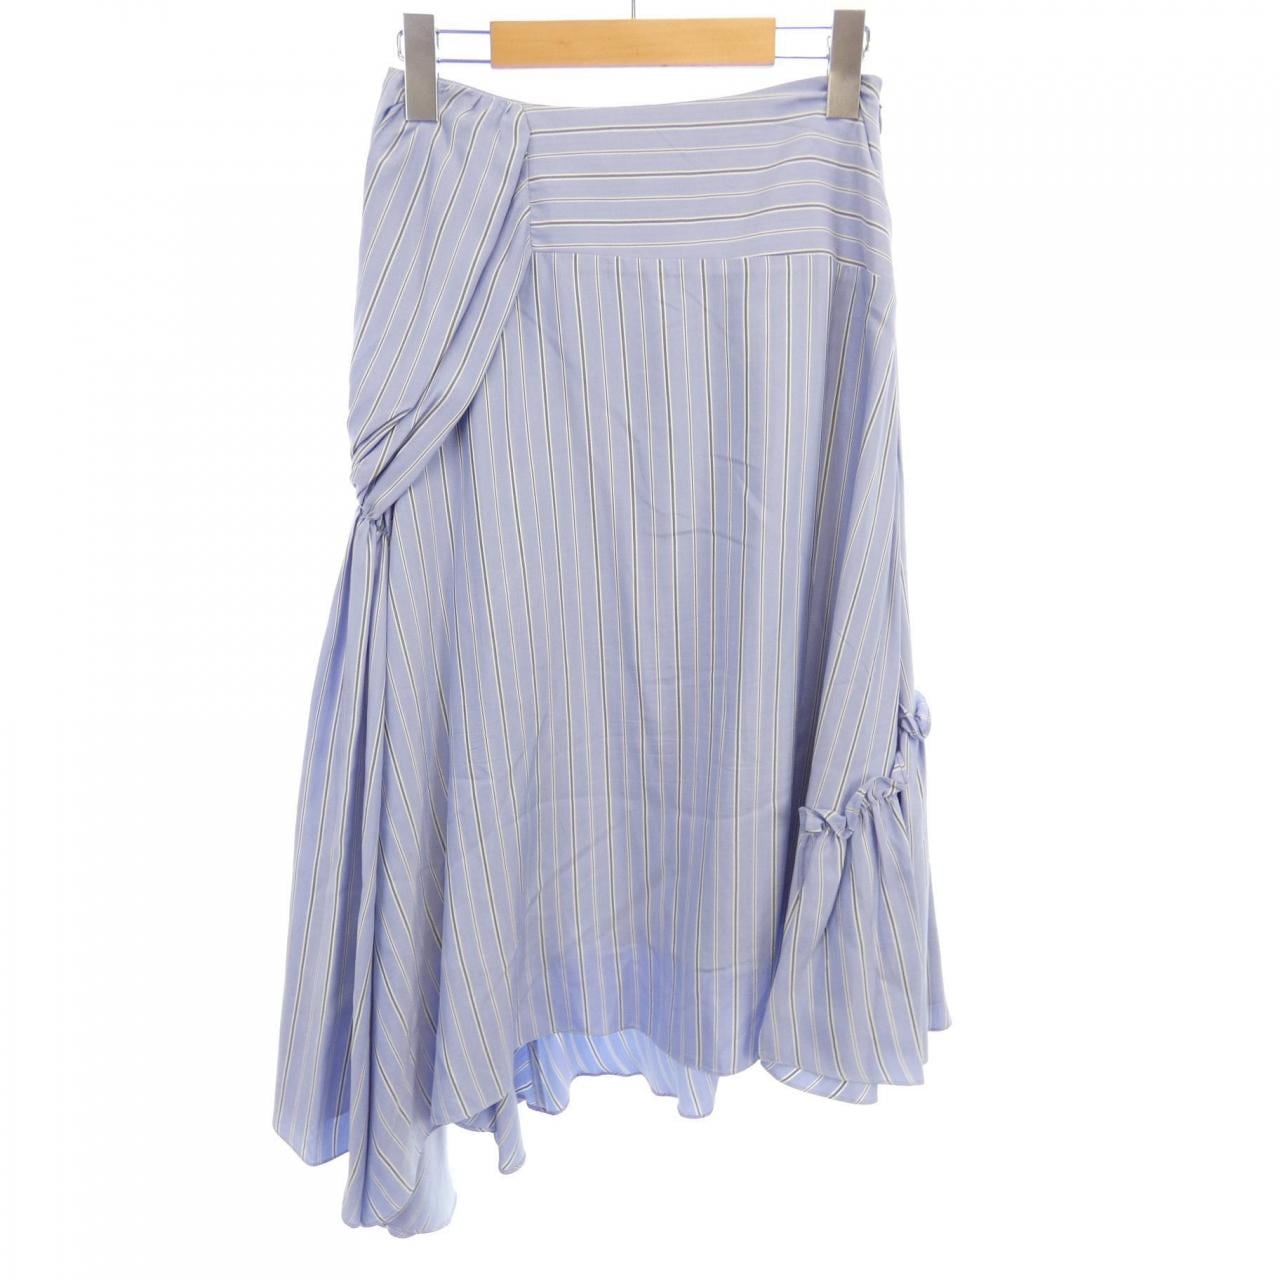 Jay Double Anderson J.W.ANDERSON Skirt